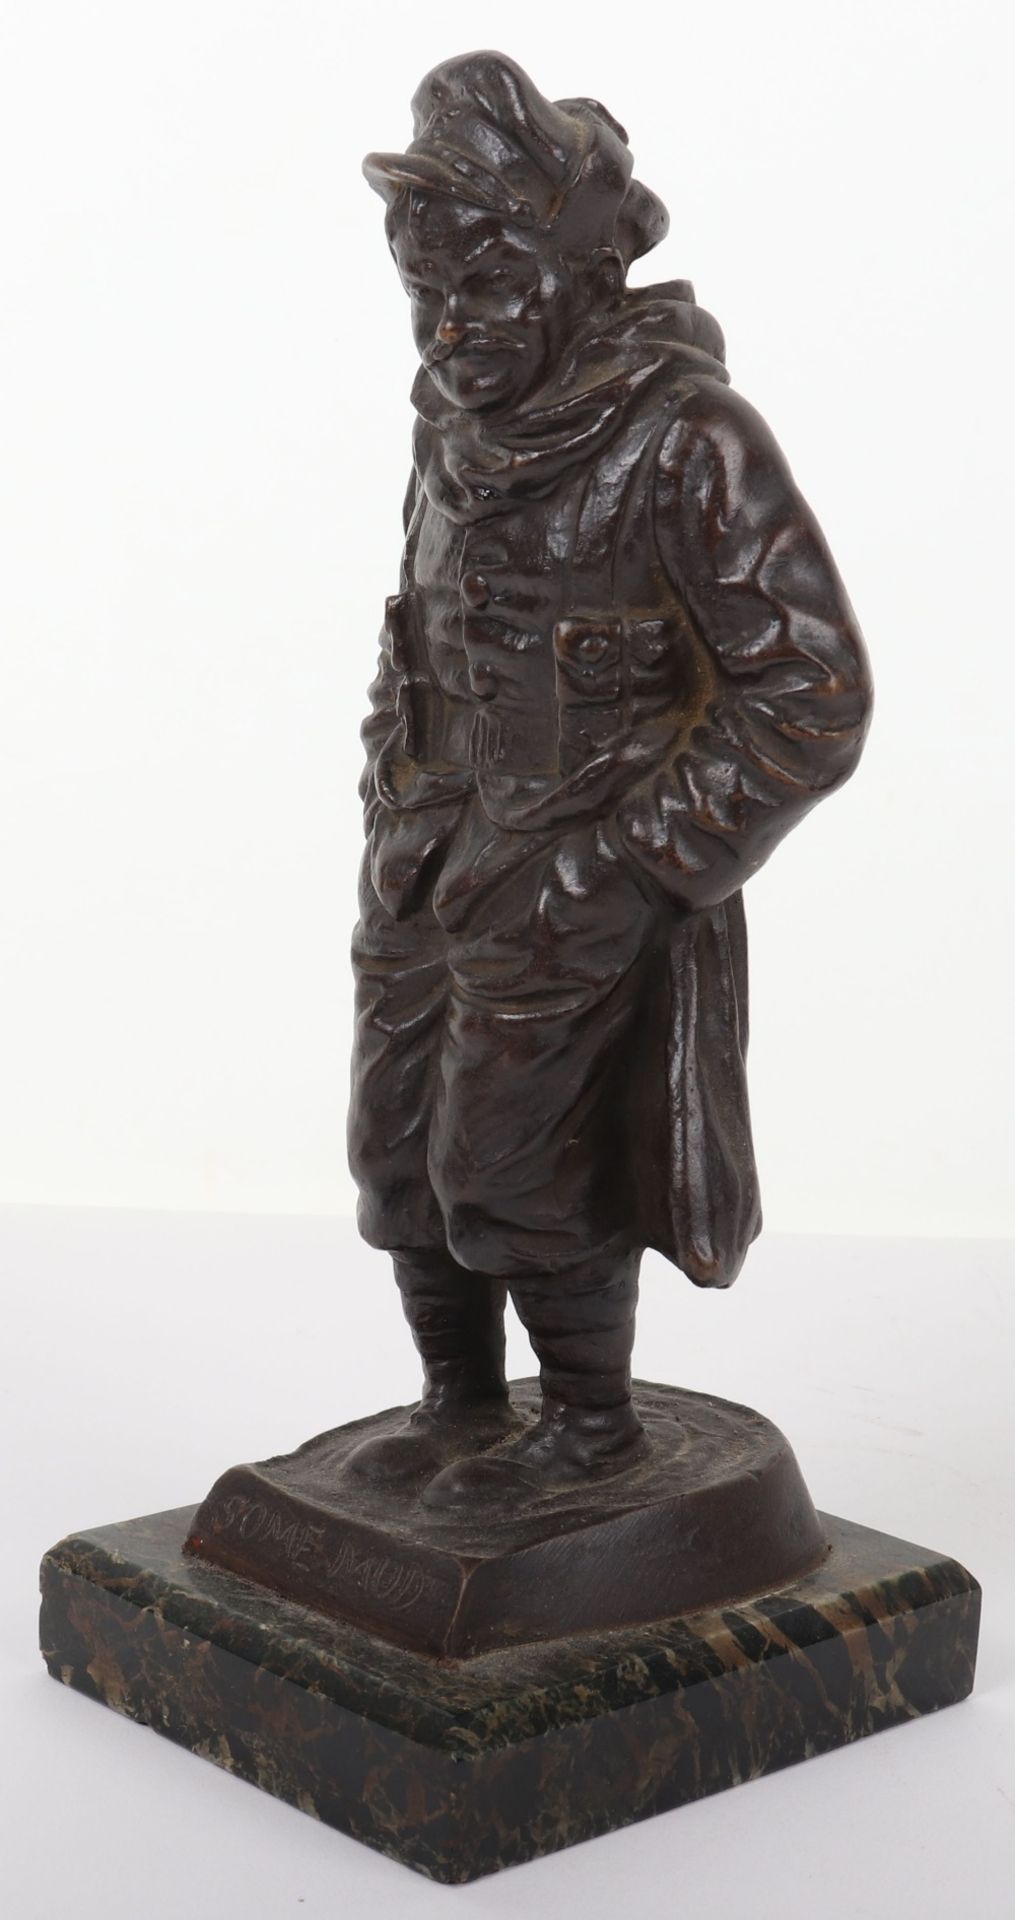 Bronze Figure of a WW1 British Tommy in the Bruce Bairnsfather “Old Bill” Style - Image 7 of 7